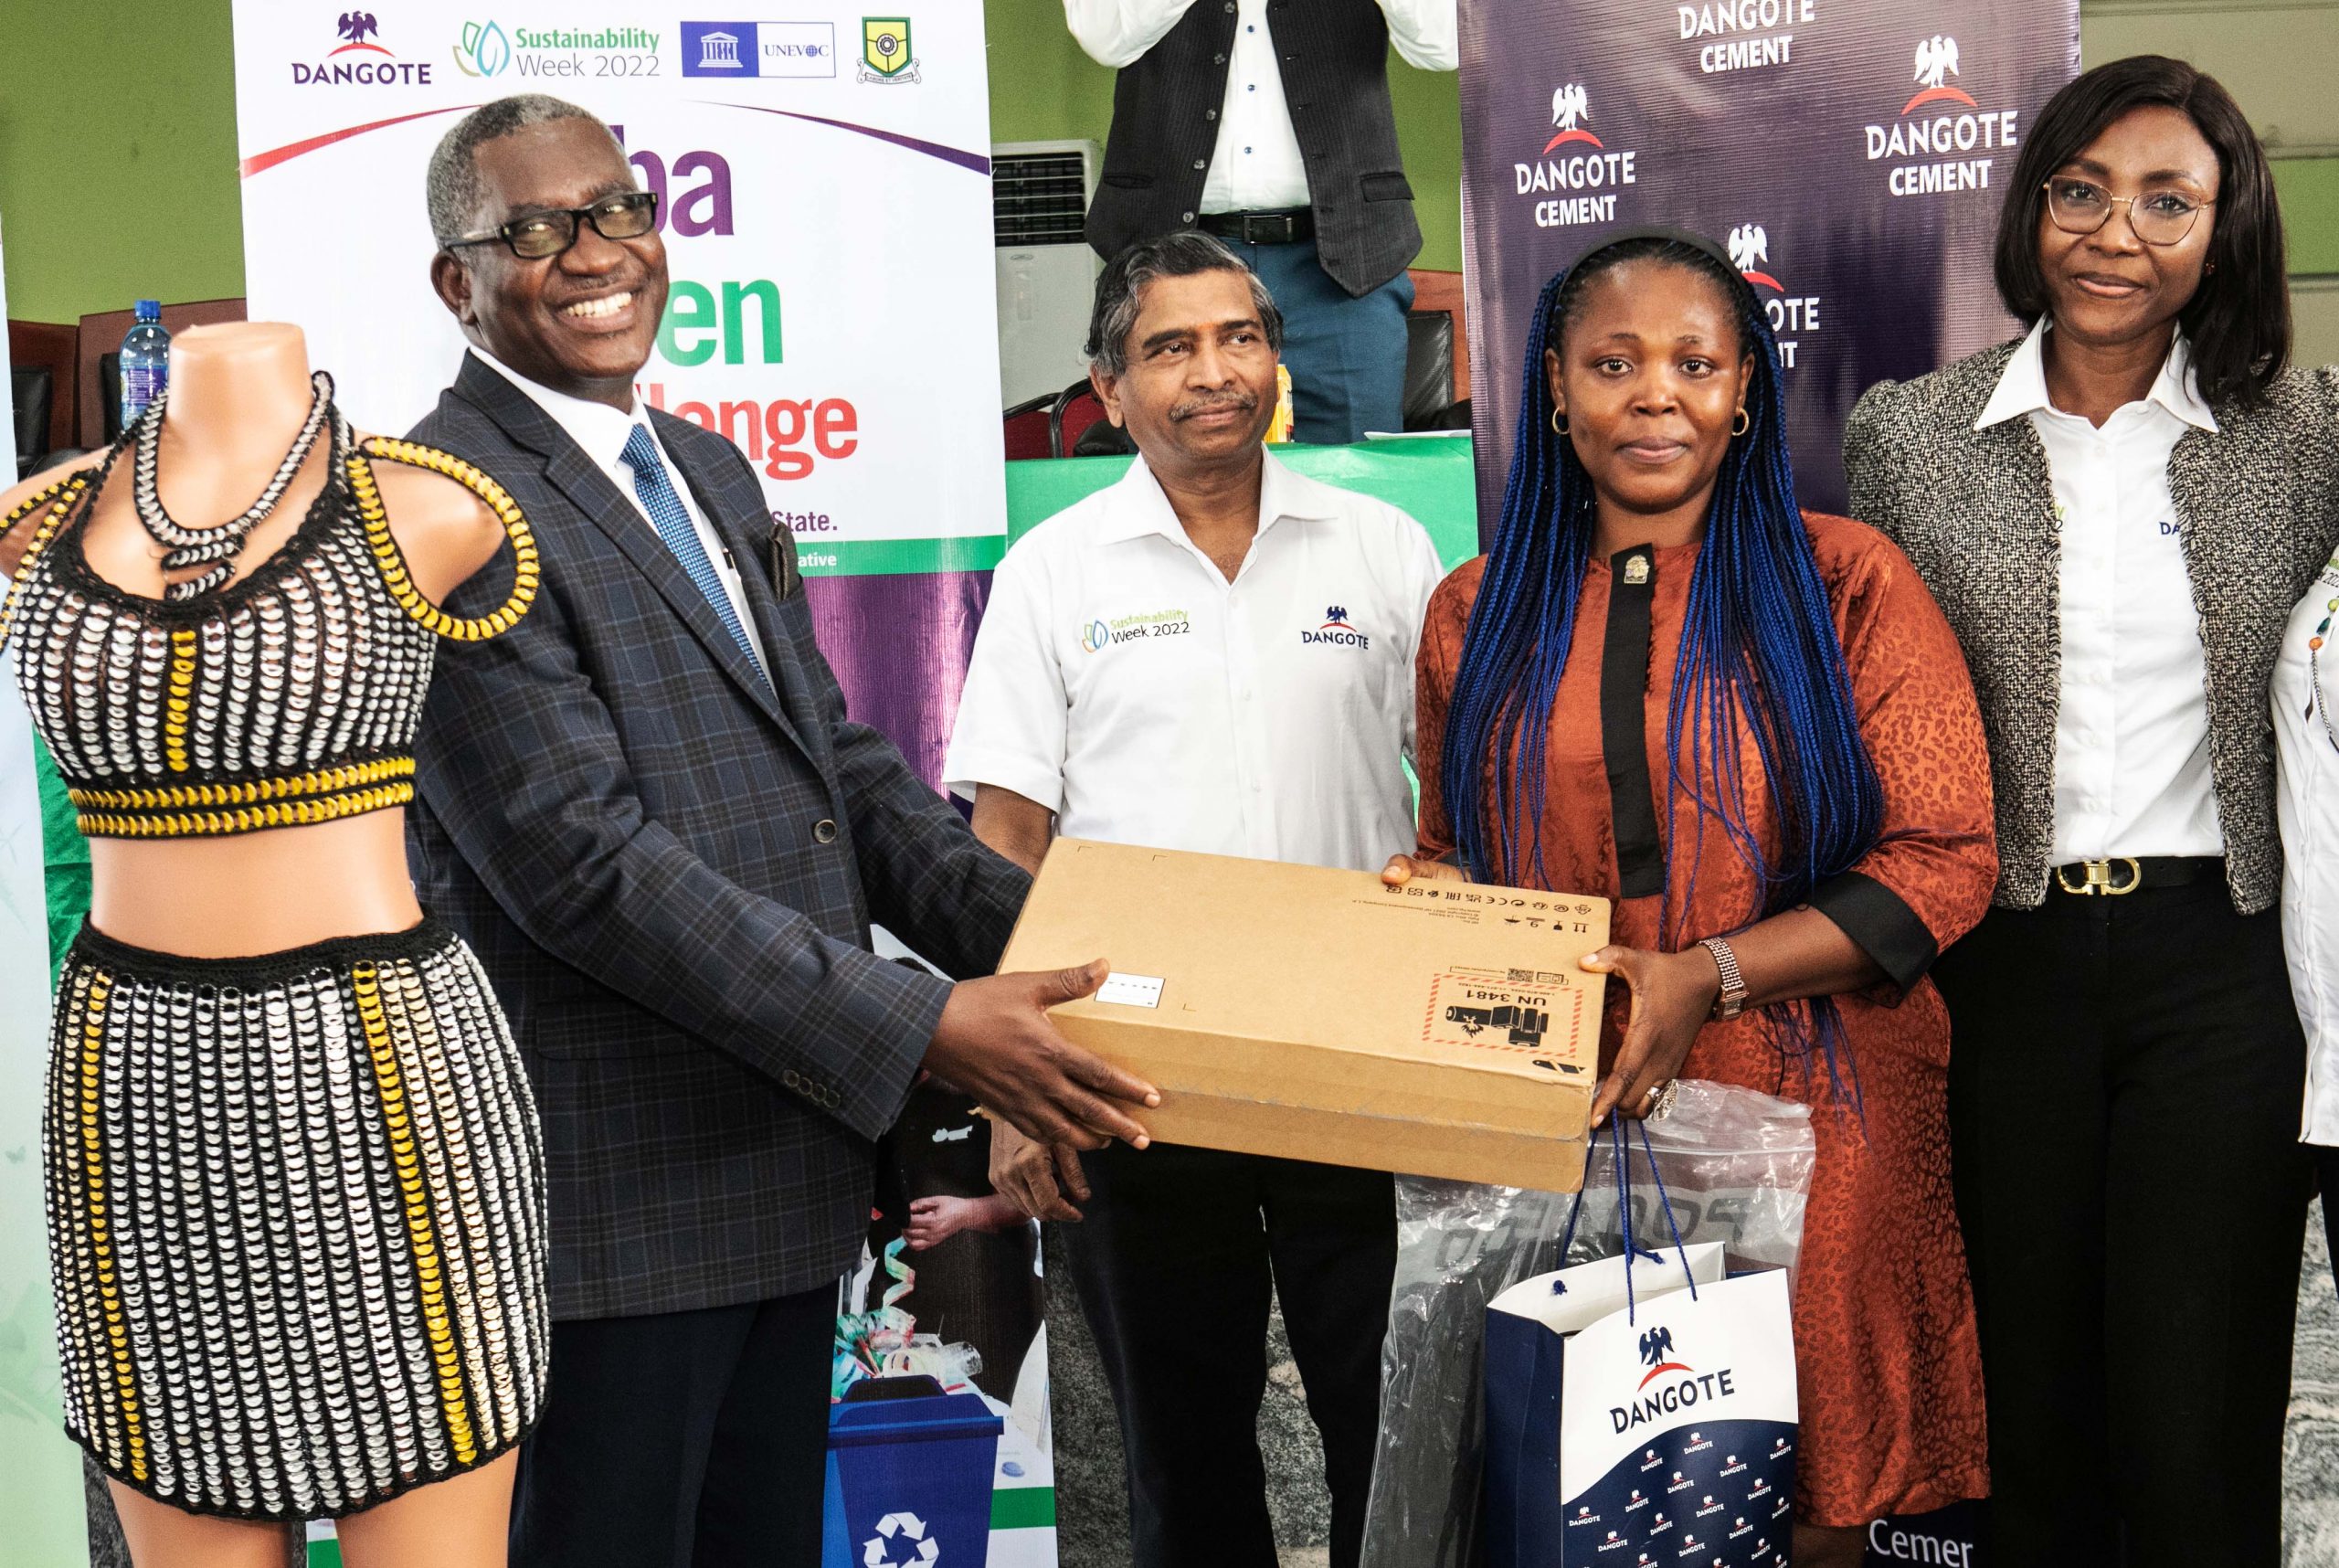 Dangote launches a circular economy programme, trains traders on financial literacy